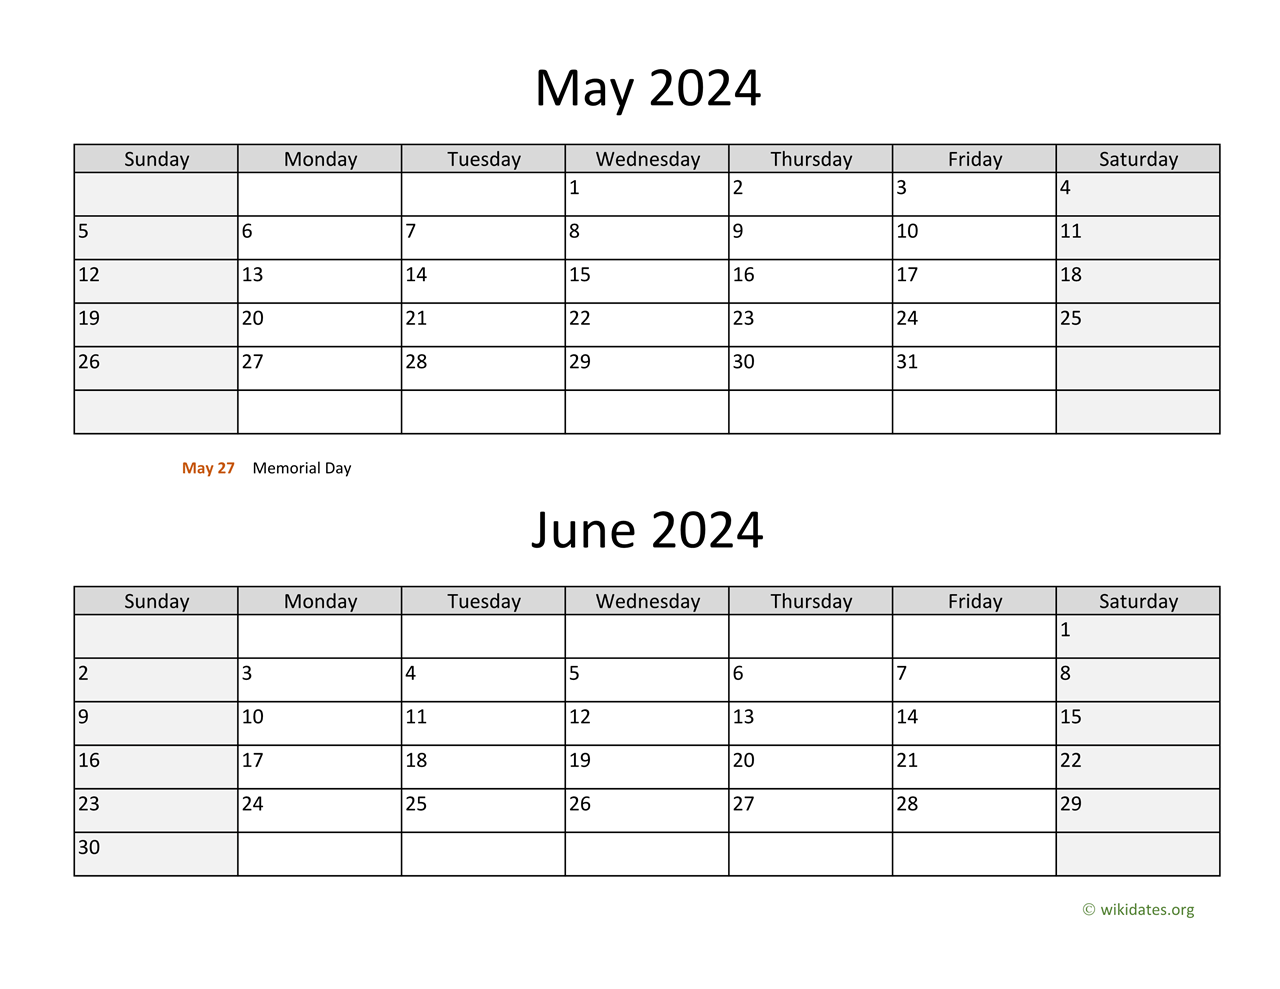 May and June 2024 Calendar | WikiDates.org